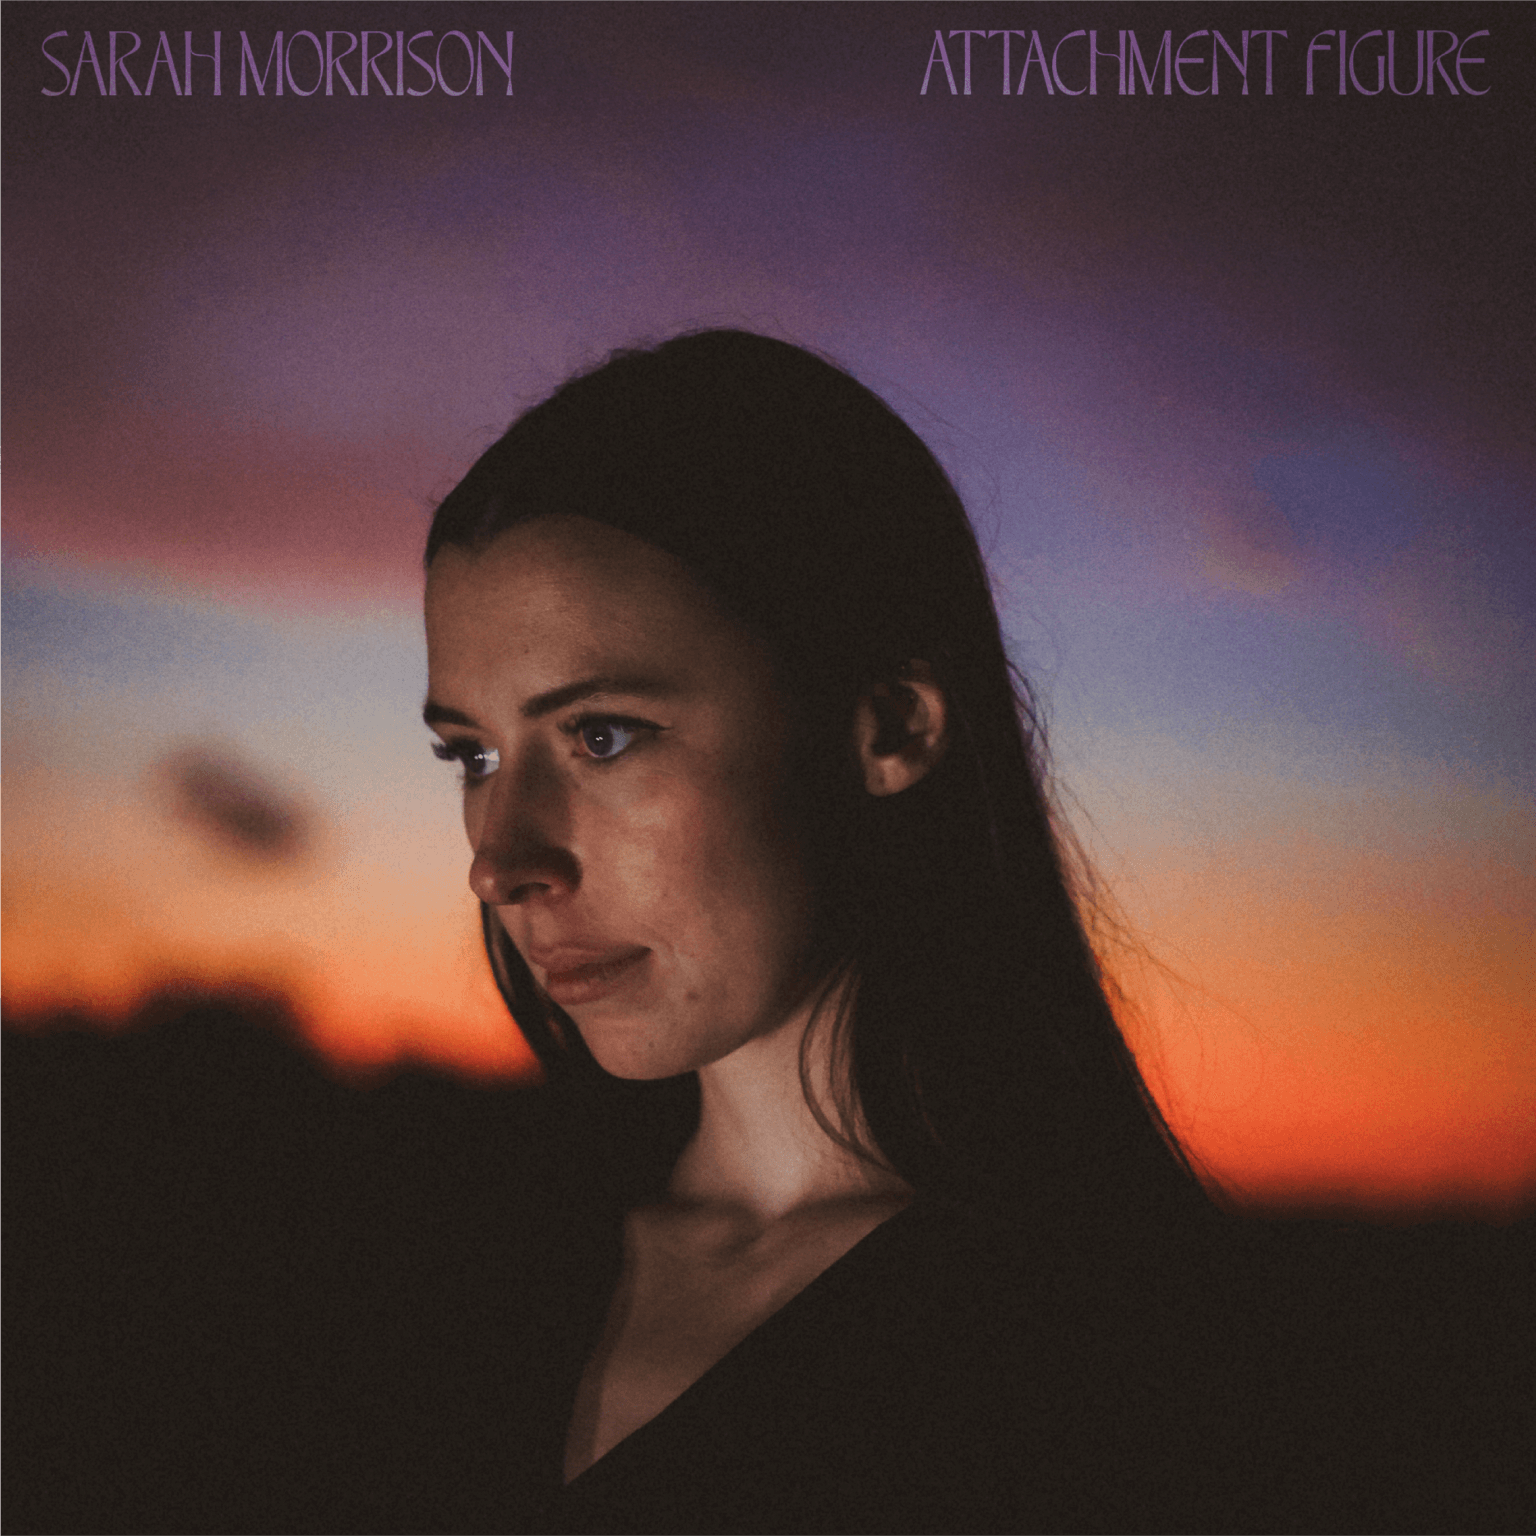 "Knowing Thyselves" By Sarah Morrison is Northern Transmissions Song of the Day. The track is of her forthcoming album Attachment Figure